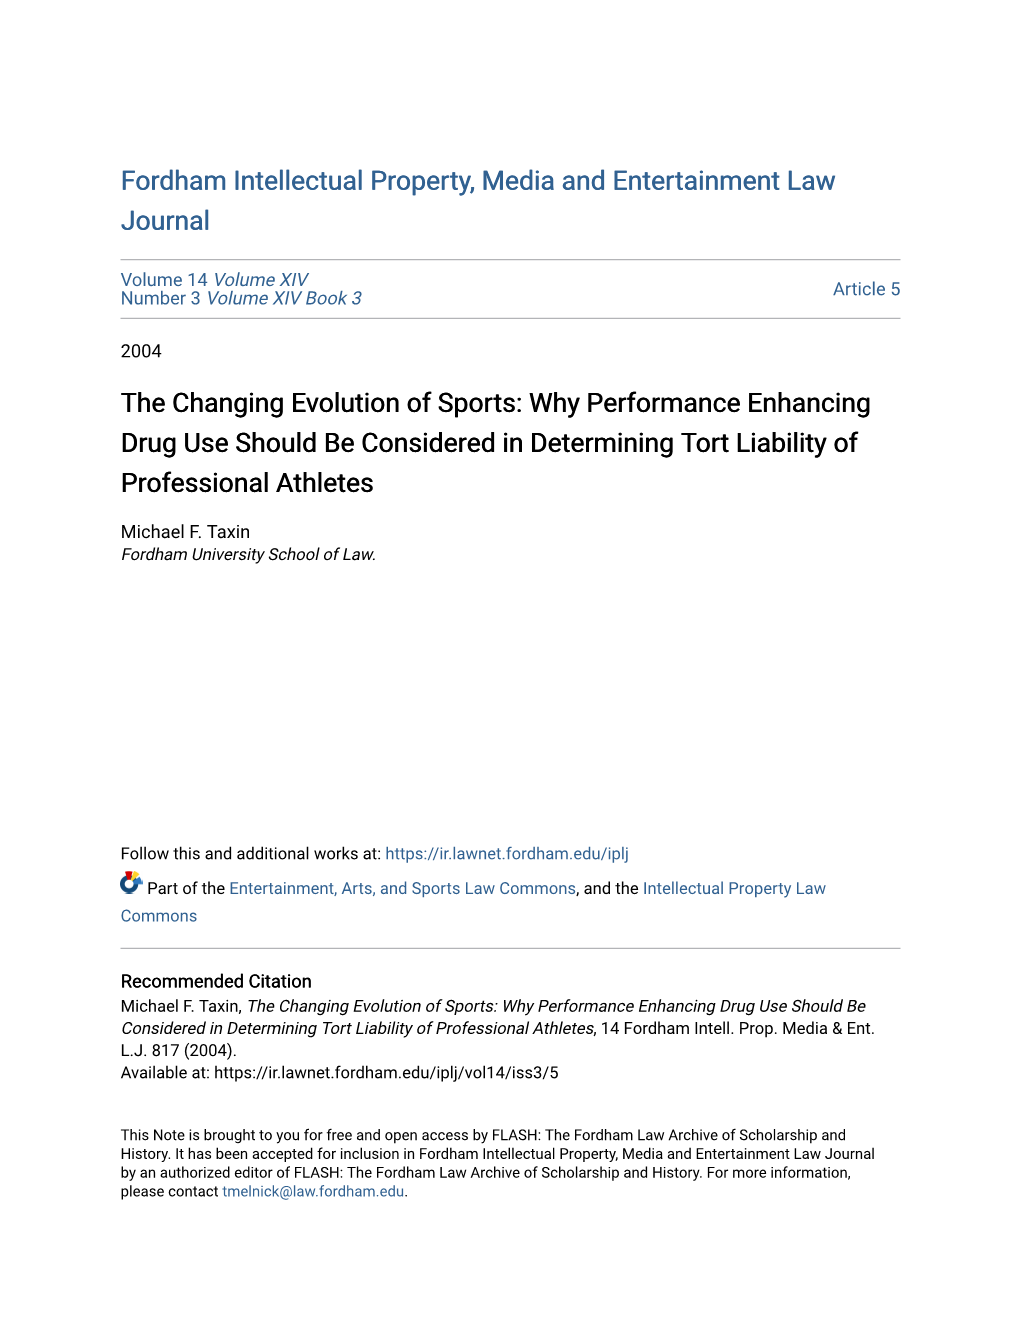 The Changing Evolution of Sports: Why Performance Enhancing Drug Use Should Be Considered in Determining Tort Liability of Professional Athletes